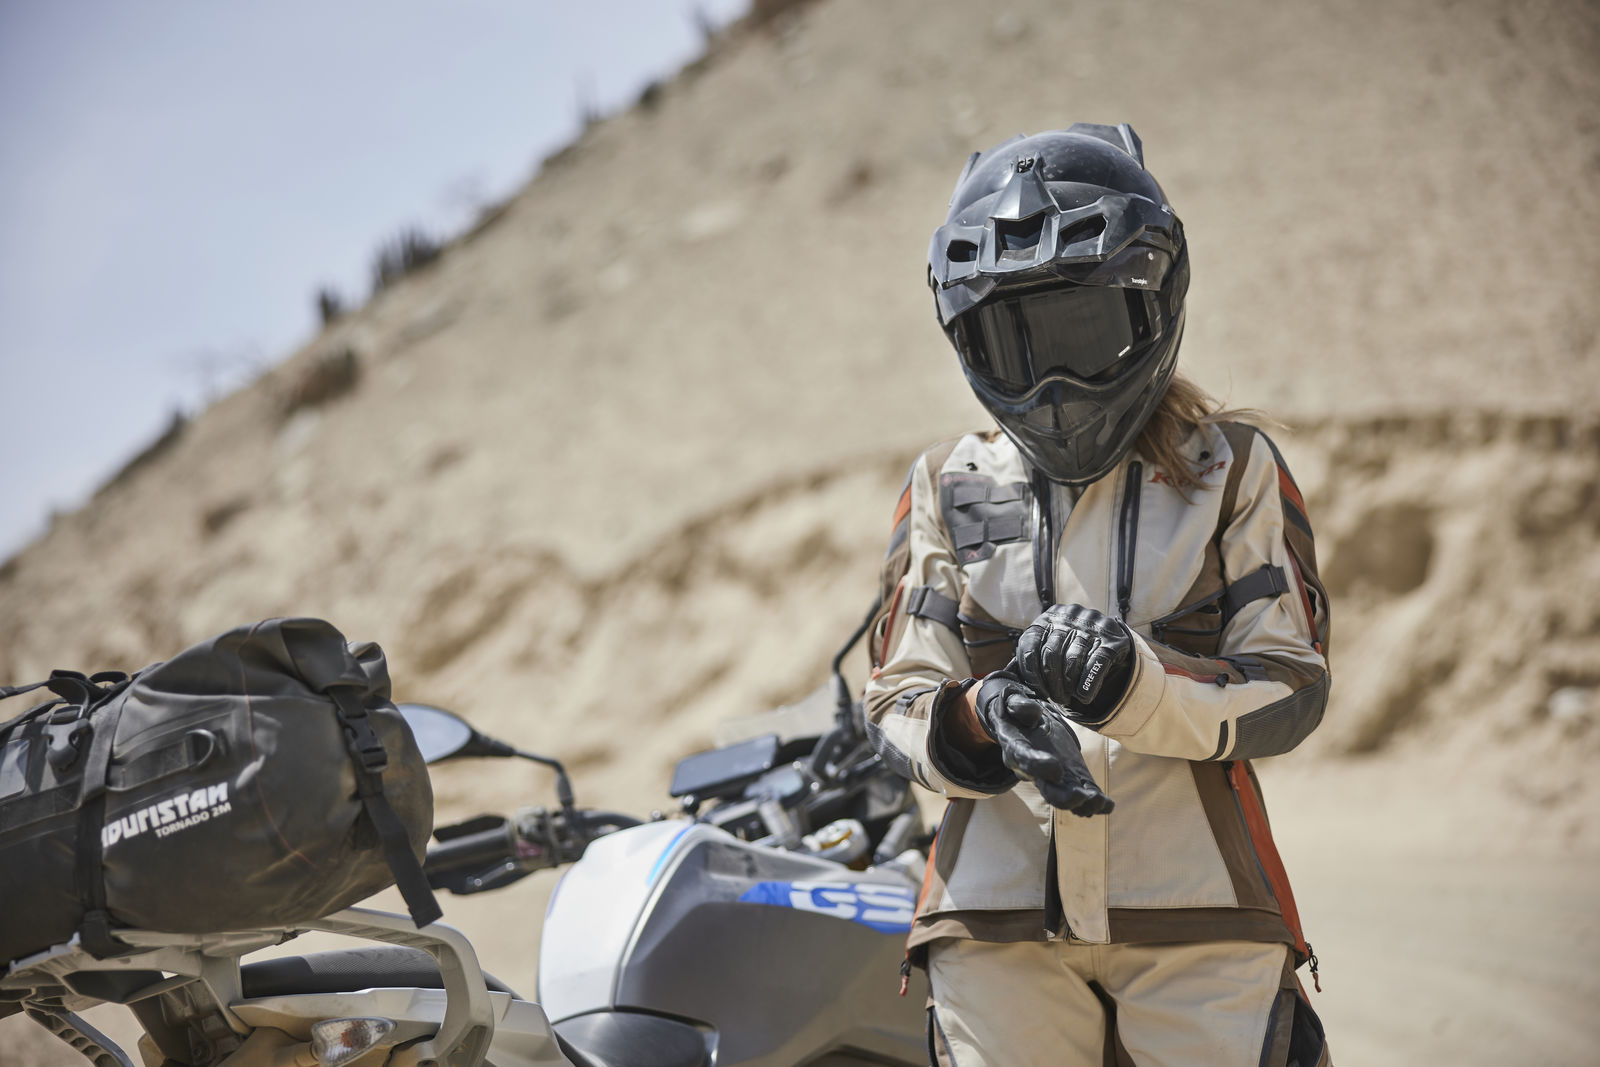 First look: 2022 KLIM Riding Gear Collection